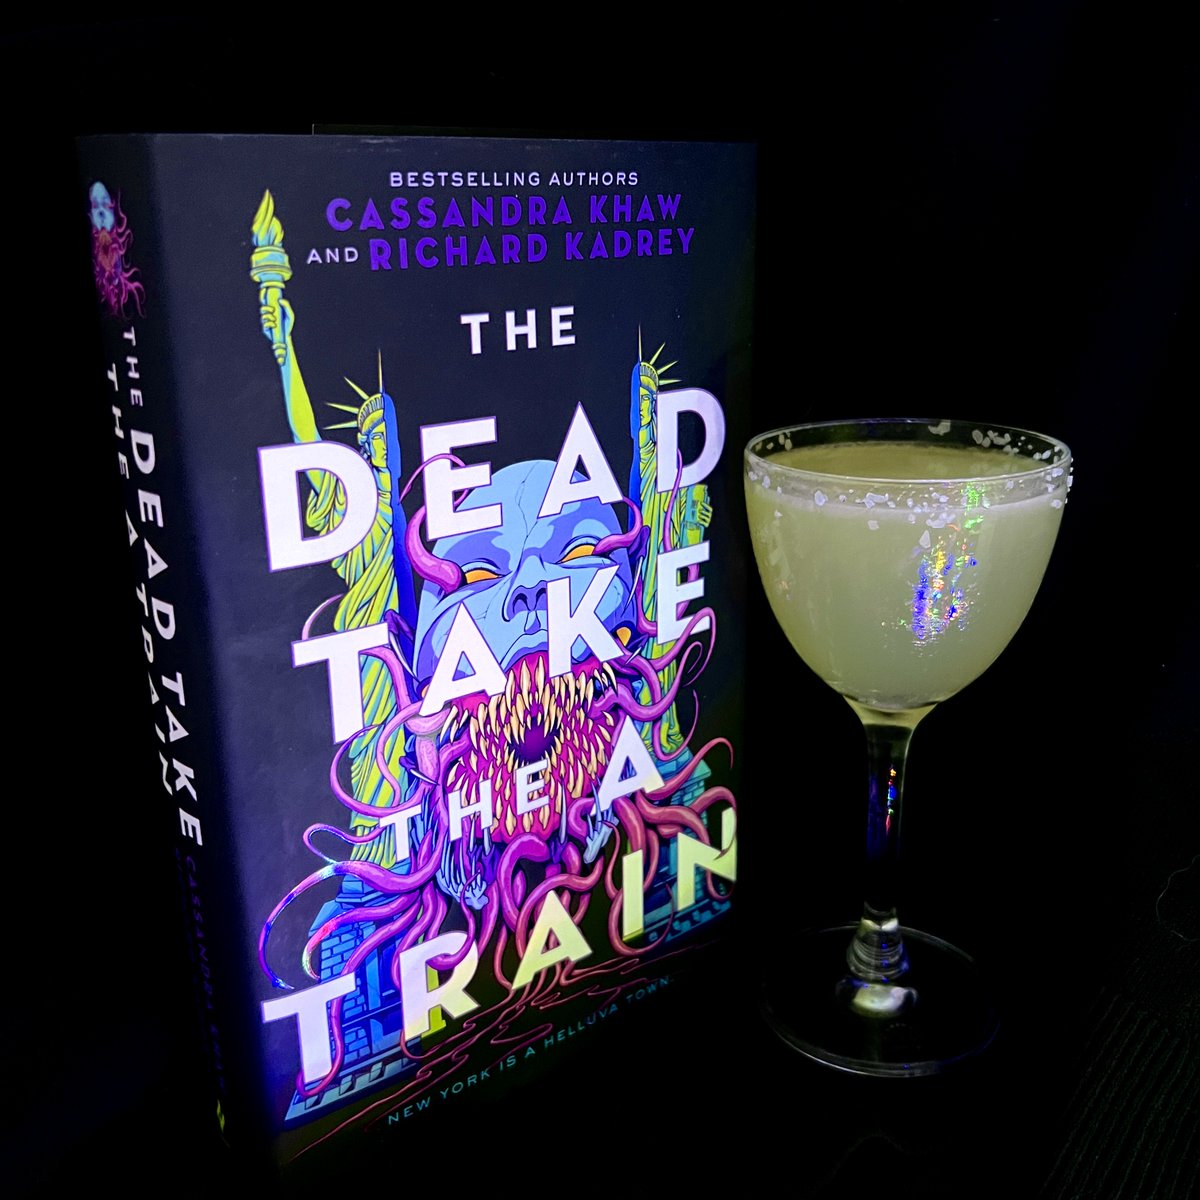 NEW VIDEO ALERT! Today on Bar Cart Bookshelf we're talking about THE DEAD TAKE THE A TRAIN by Cassandra Khaw and Richard Kadrey. The Wolf of Wall Street draped in occult intestines, this urban fantasy horror rips. And tears. Our drink, the Gibbet, is a HIGH INTENSITY gimlet riff.